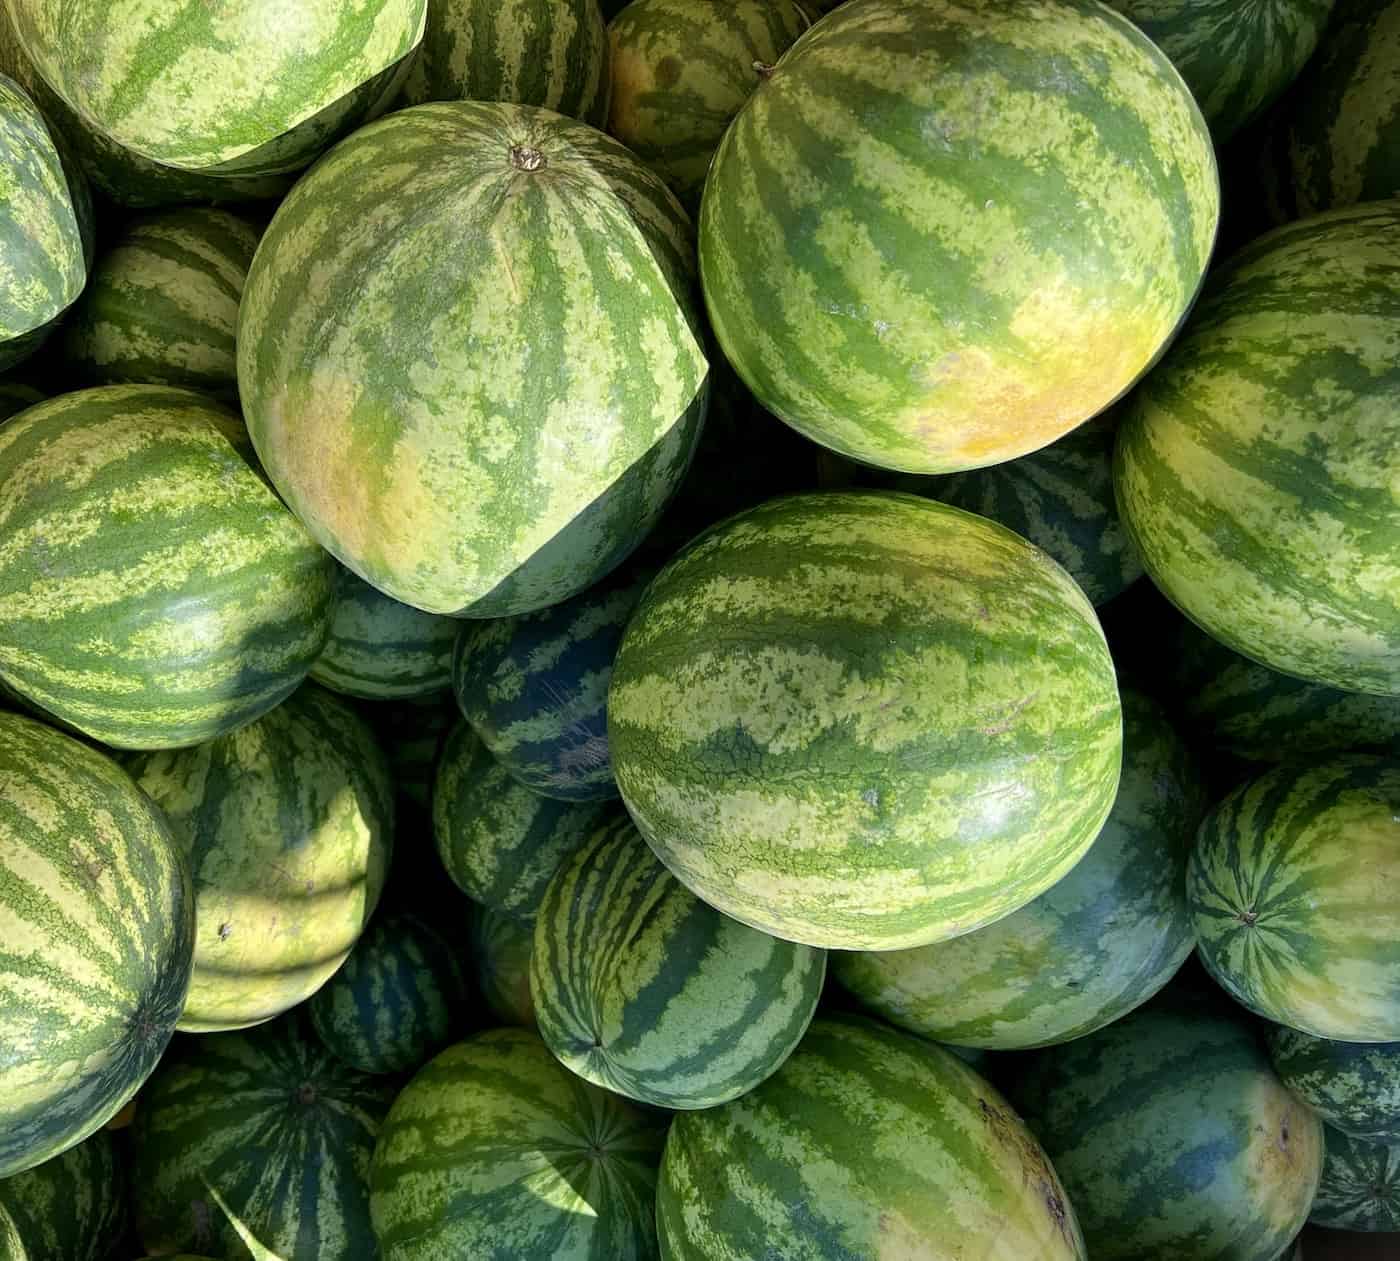 Ripe watermelons with yellow ground spots